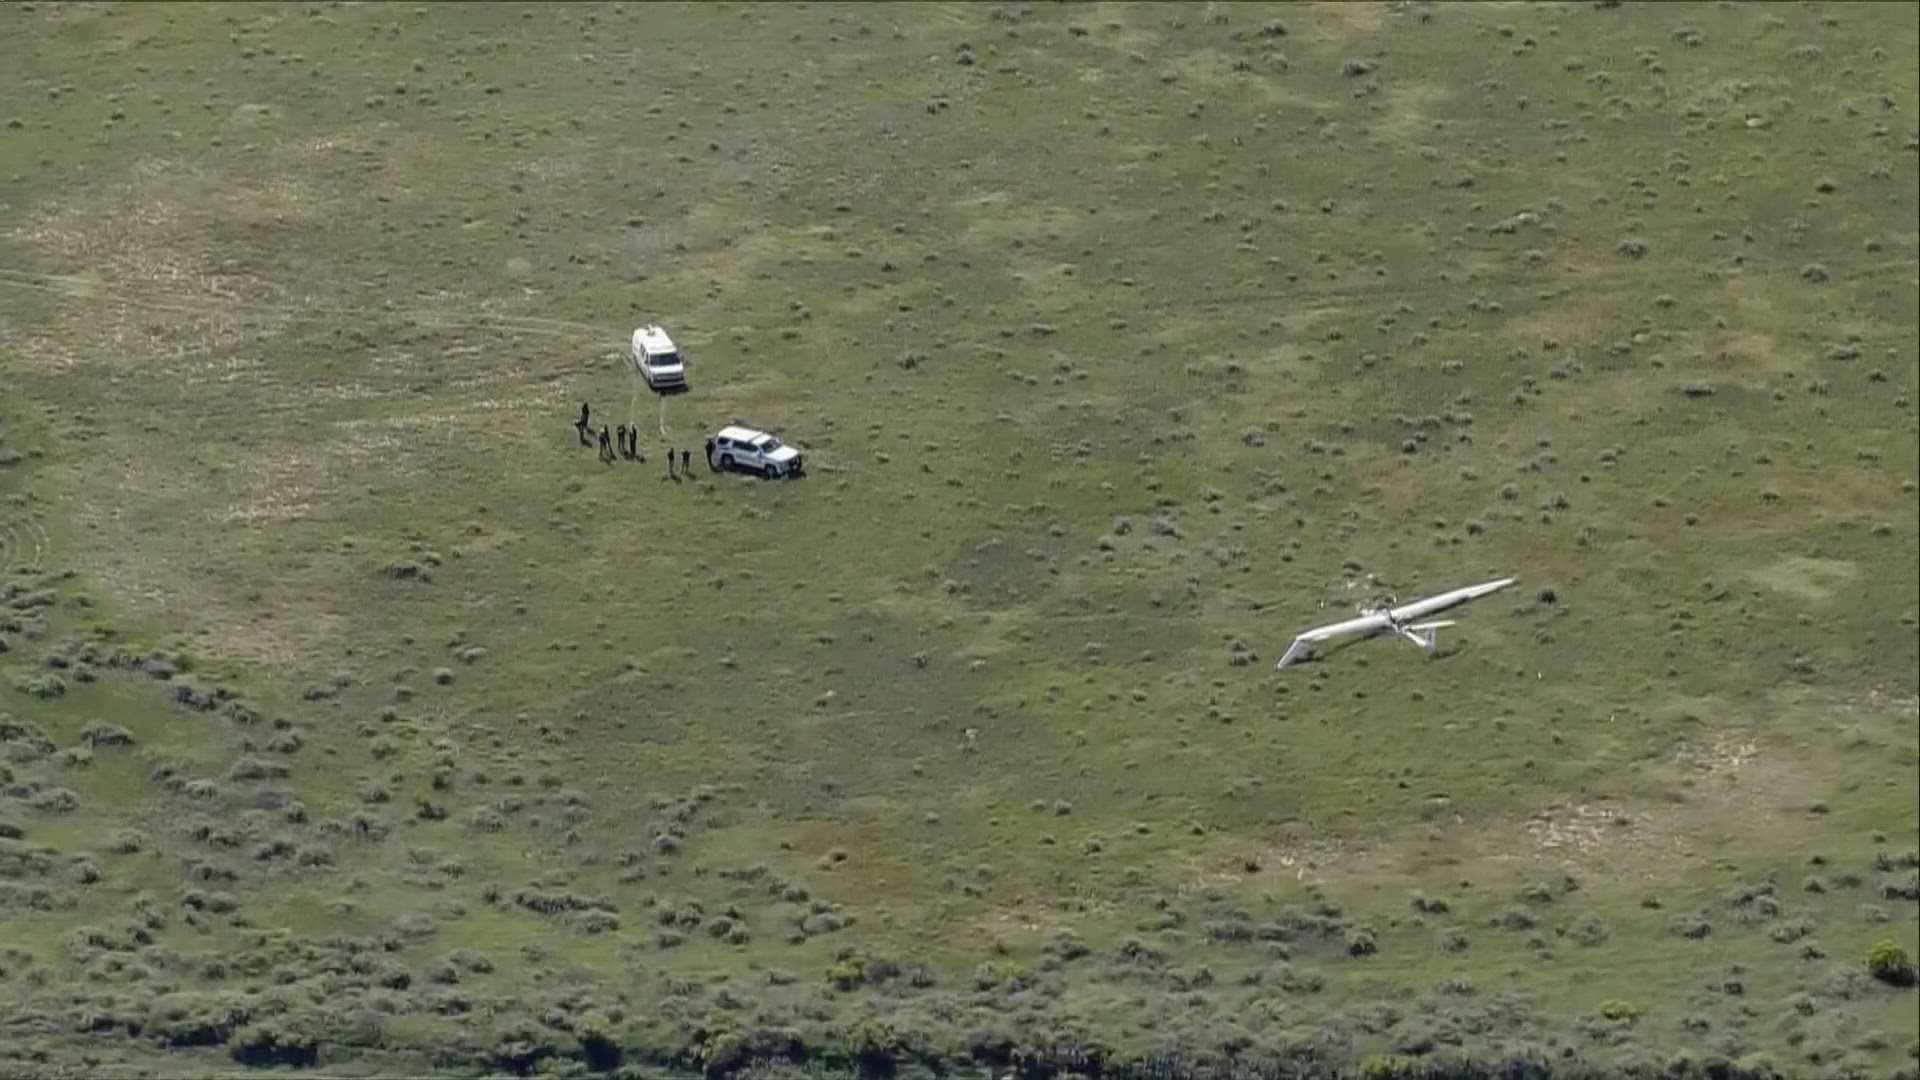 The plane crashed in a field south of Soapstone Prairie Natural Area in northern Larimer County.